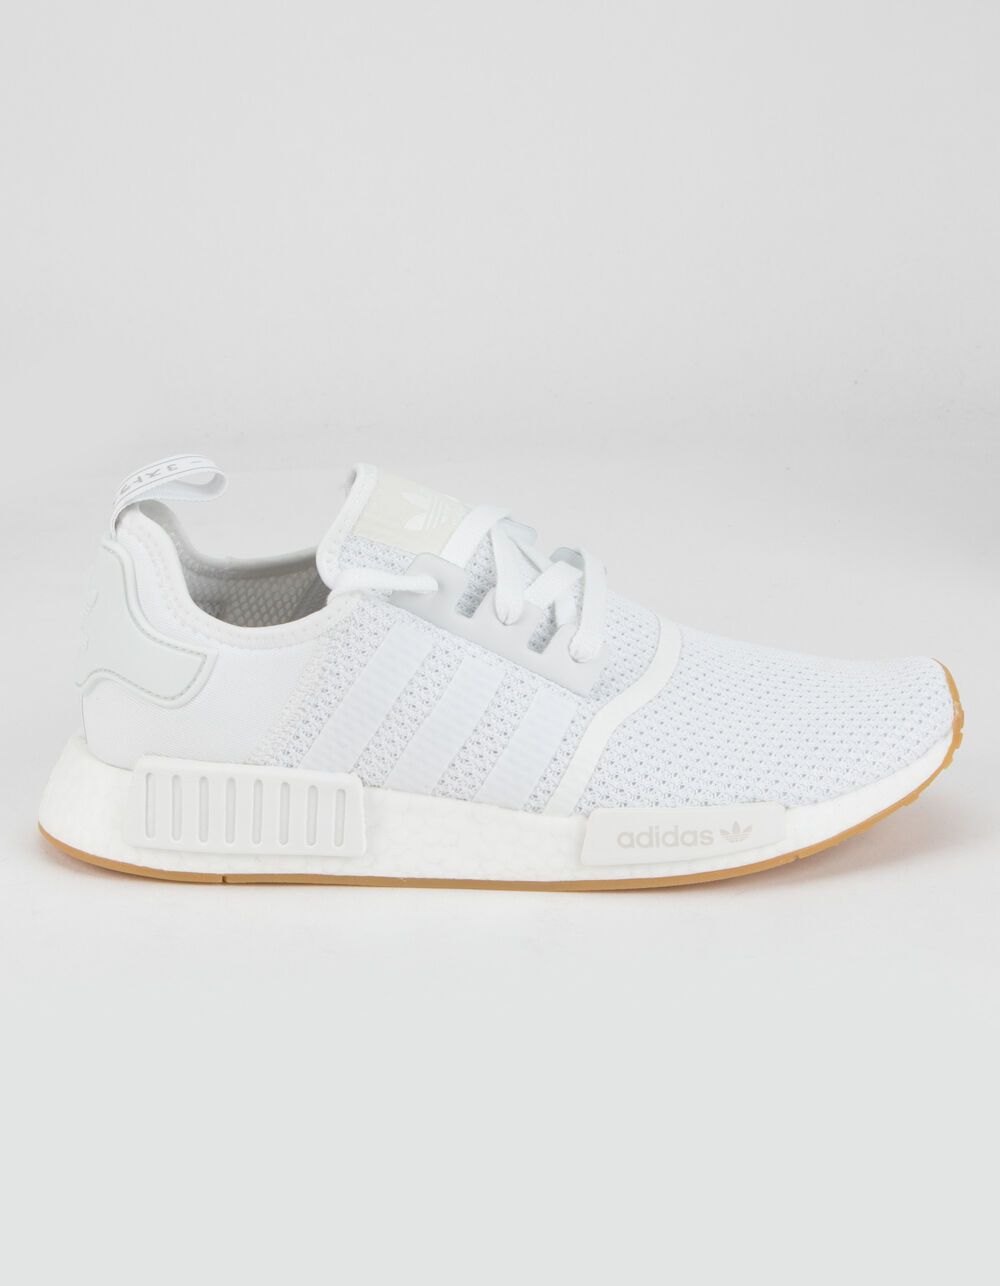 ADIDAS NMD_R1 White Shoes | Tillys